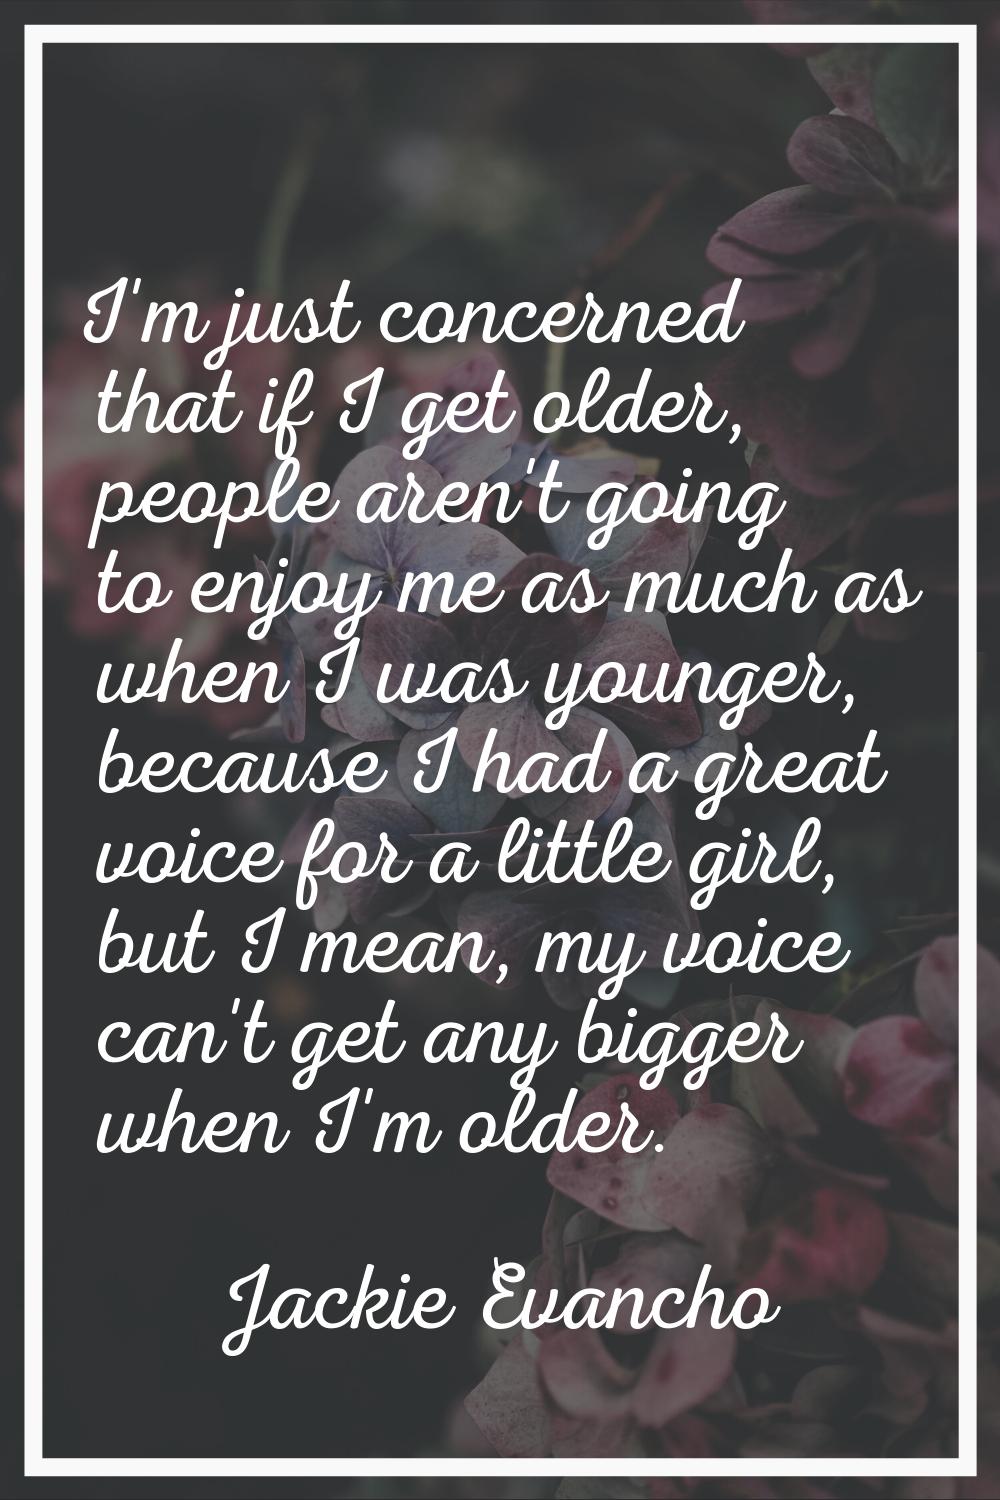 I'm just concerned that if I get older, people aren't going to enjoy me as much as when I was young